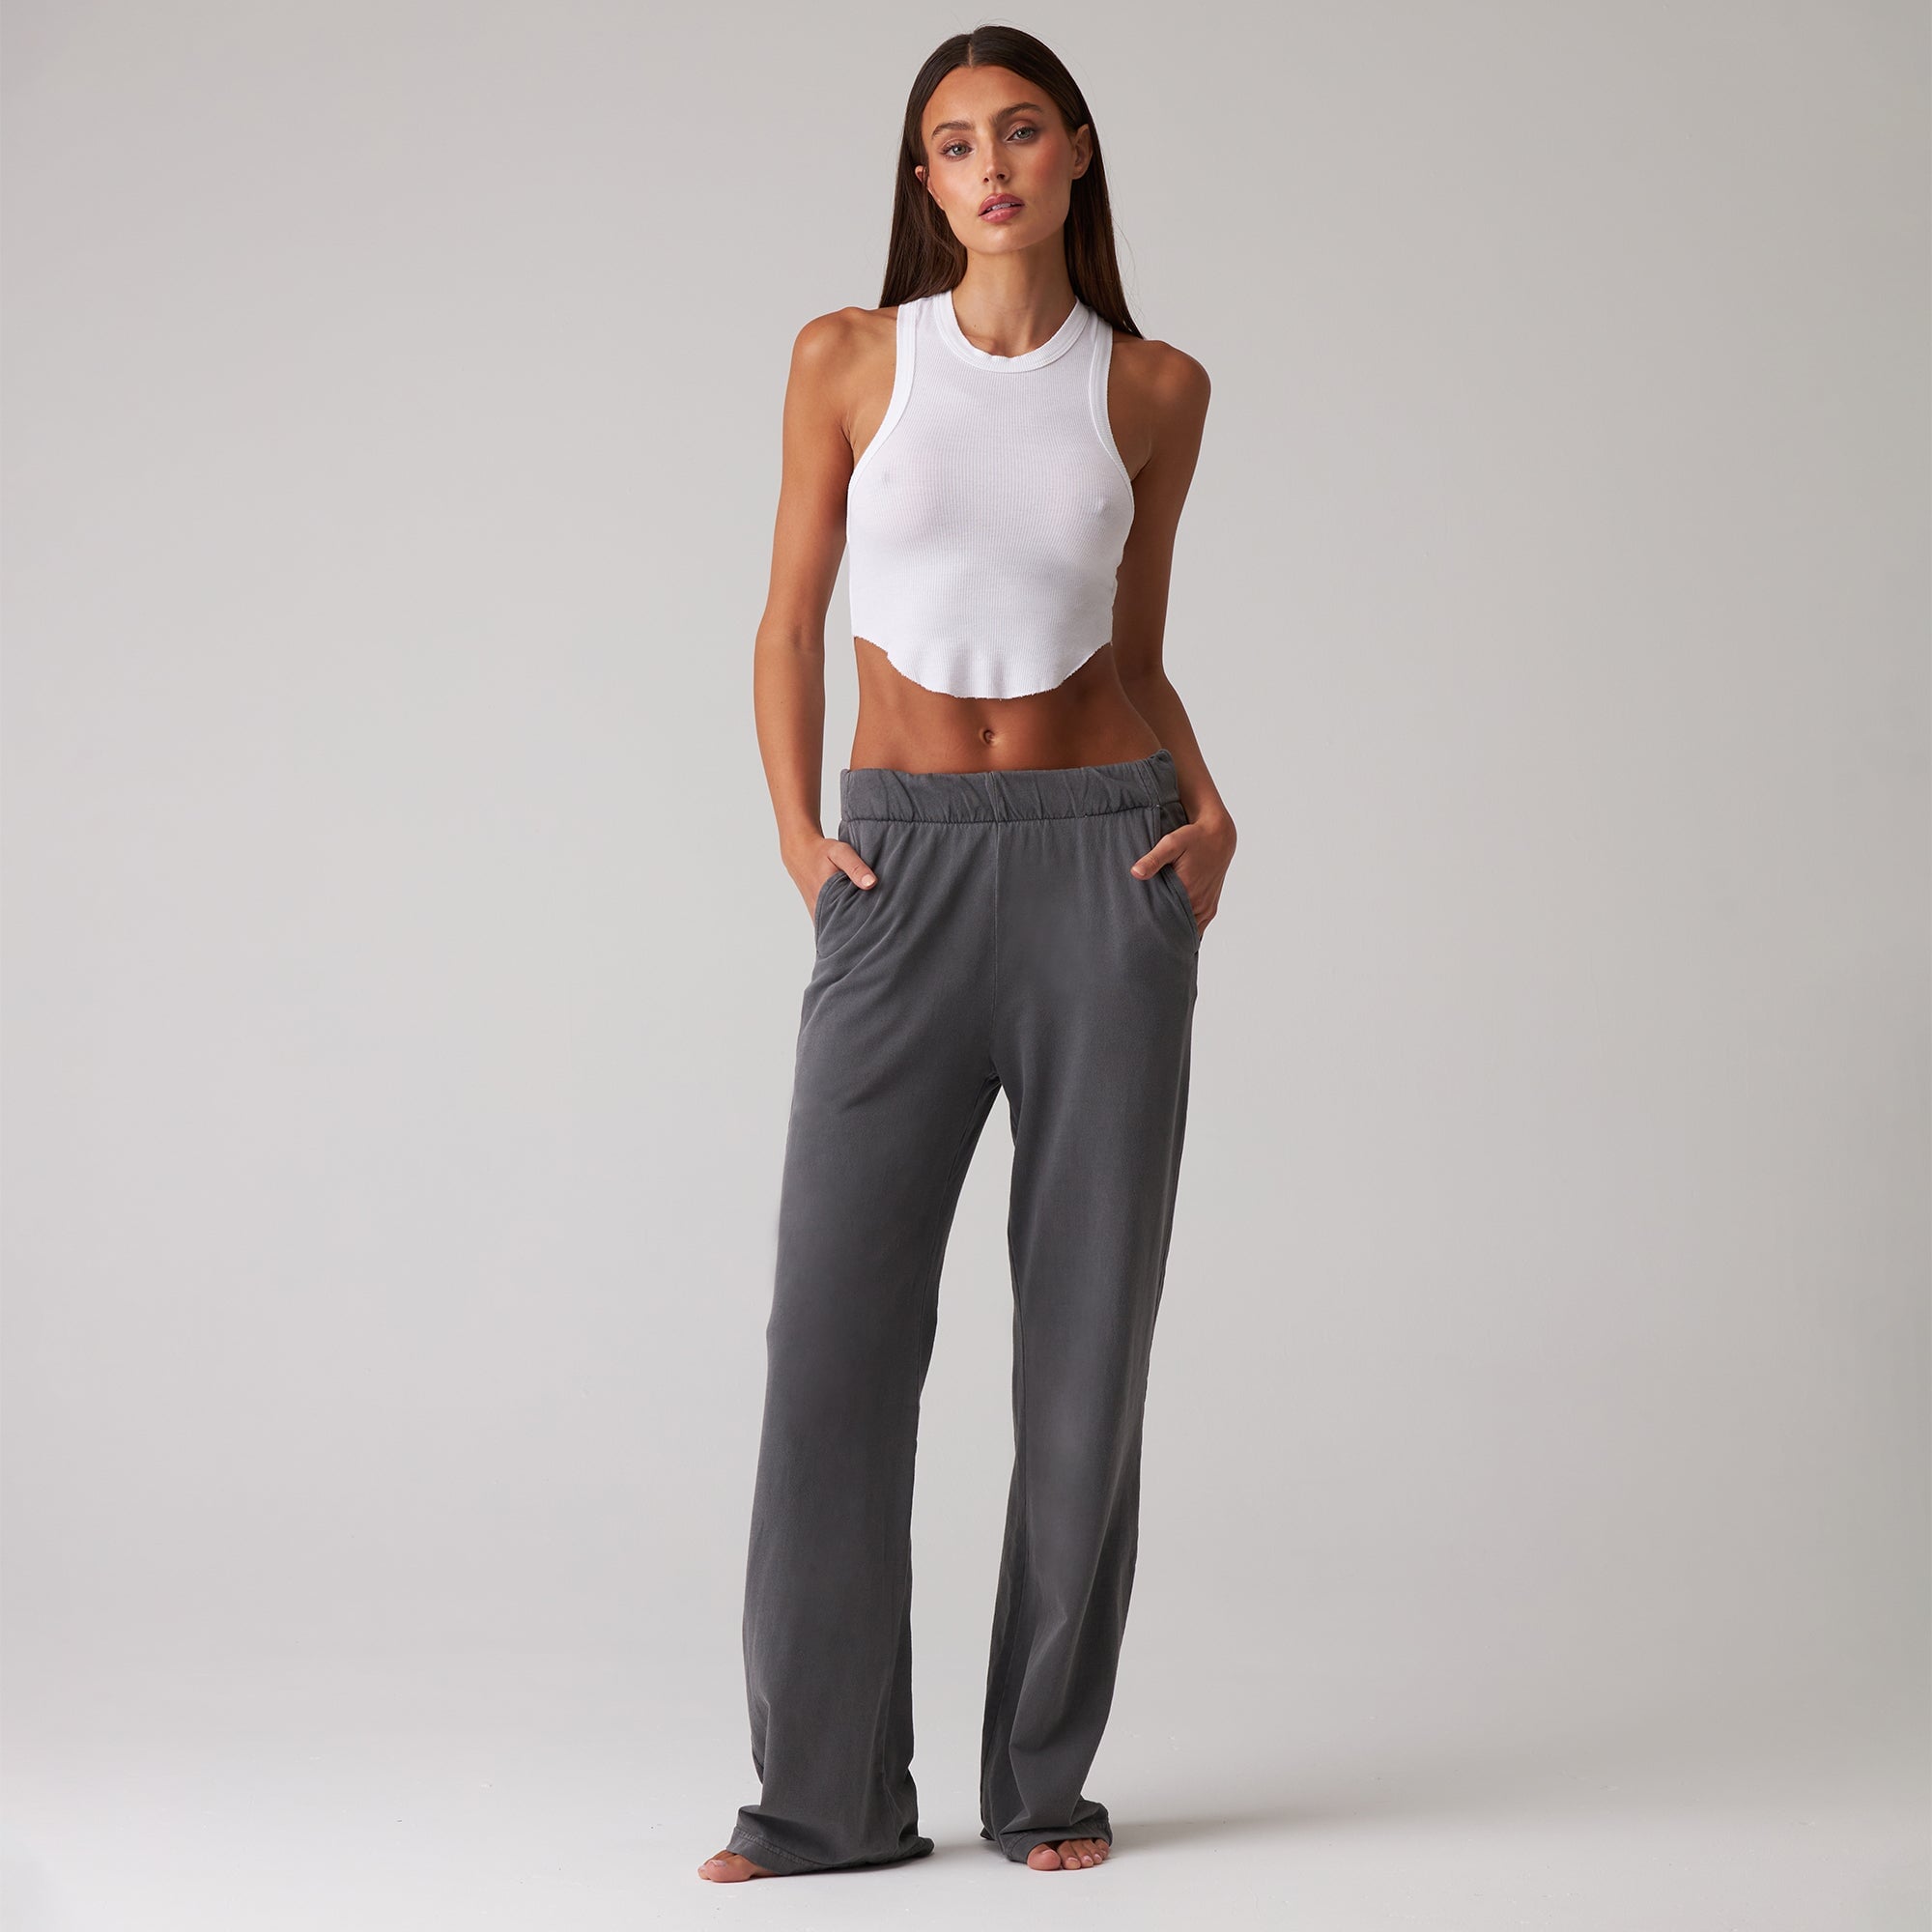 Top Quality 100% Cotton French Terry Fabric Gray Woman Jogger